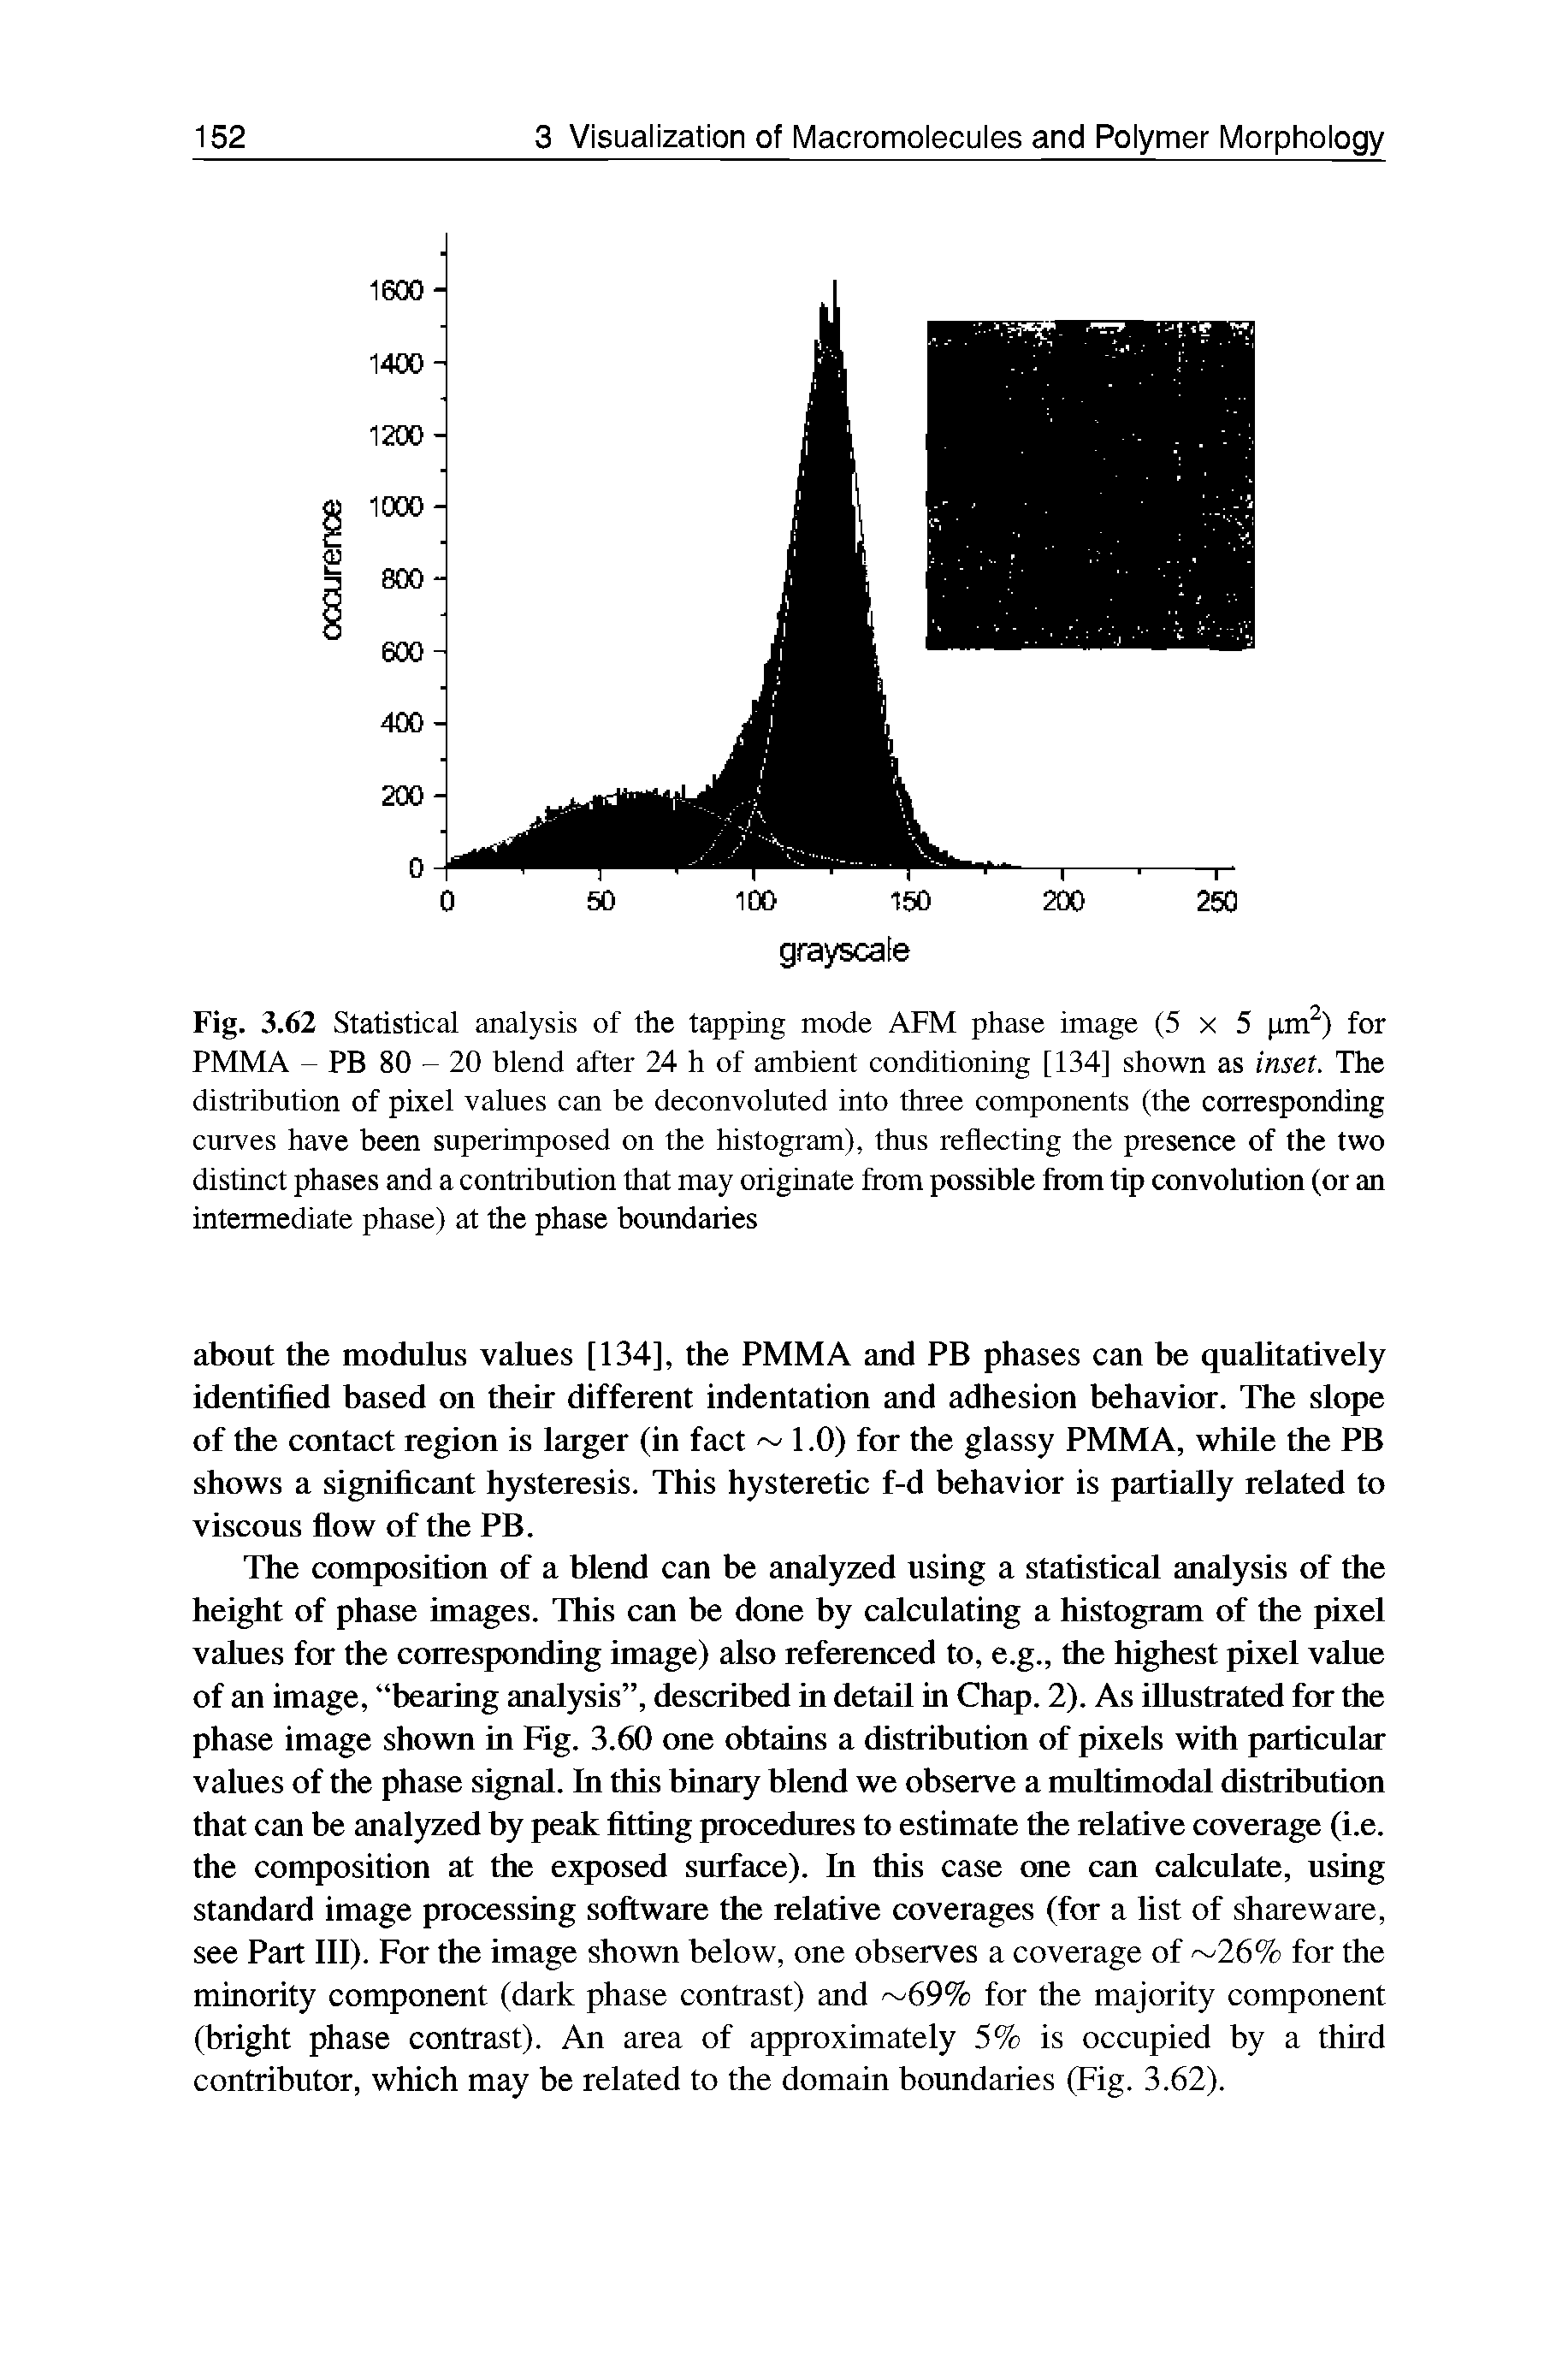 Fig. 3.62 Statistical analysis of the tapping mode AFM phase image (5x5 gm2) for PMMA - PB 80 - 20 blend after 24 h of ambient conditioning [134] shown as inset. The distribution of pixel values can be deconvoluted into three components (the corresponding curves have been superimposed on the histogram), thus reflecting the presence of the two distinct phases and a contribution that may originate from possible from tip convolution (or an intermediate phase) at the phase boundaries...